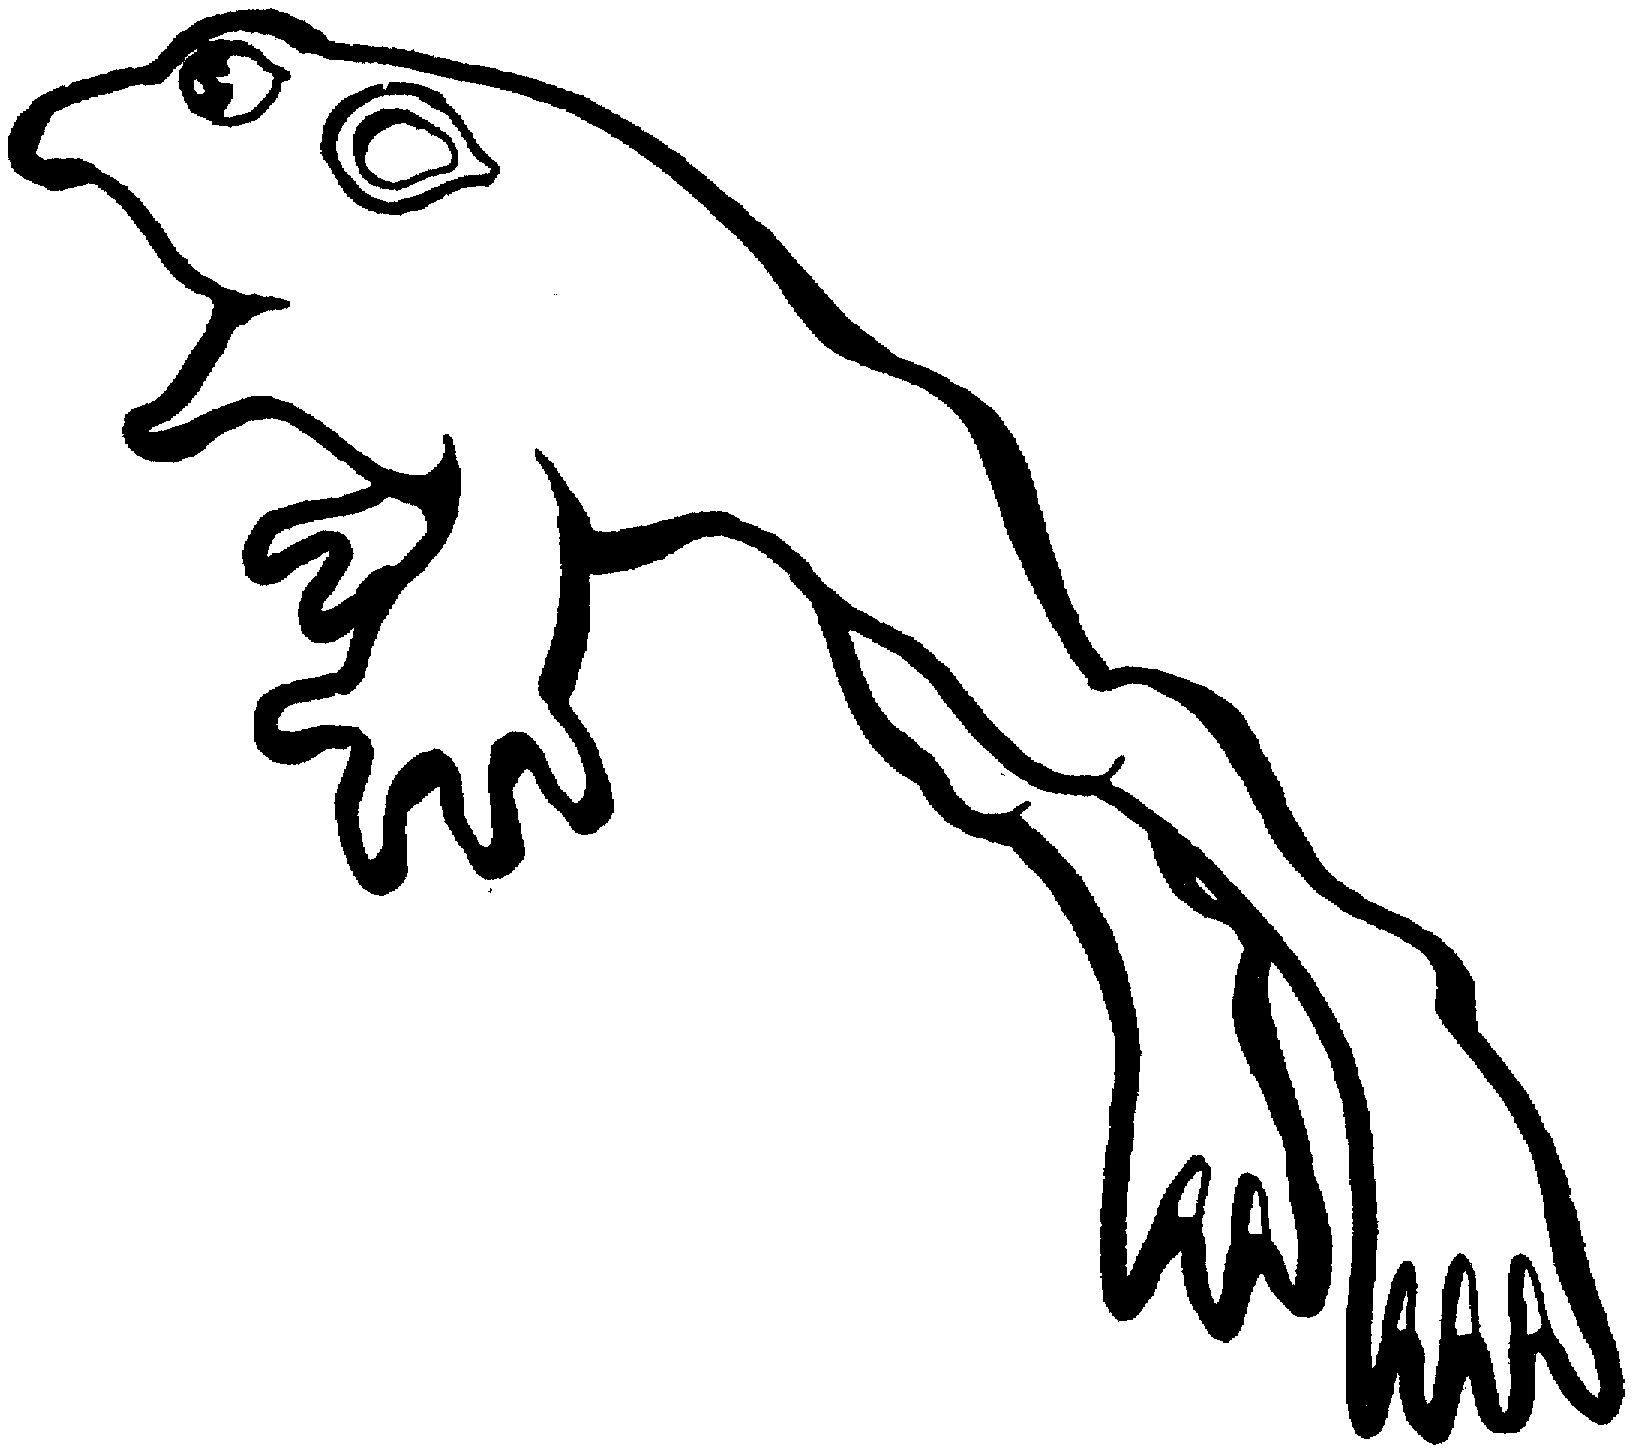 Jumping frog clipart black and white